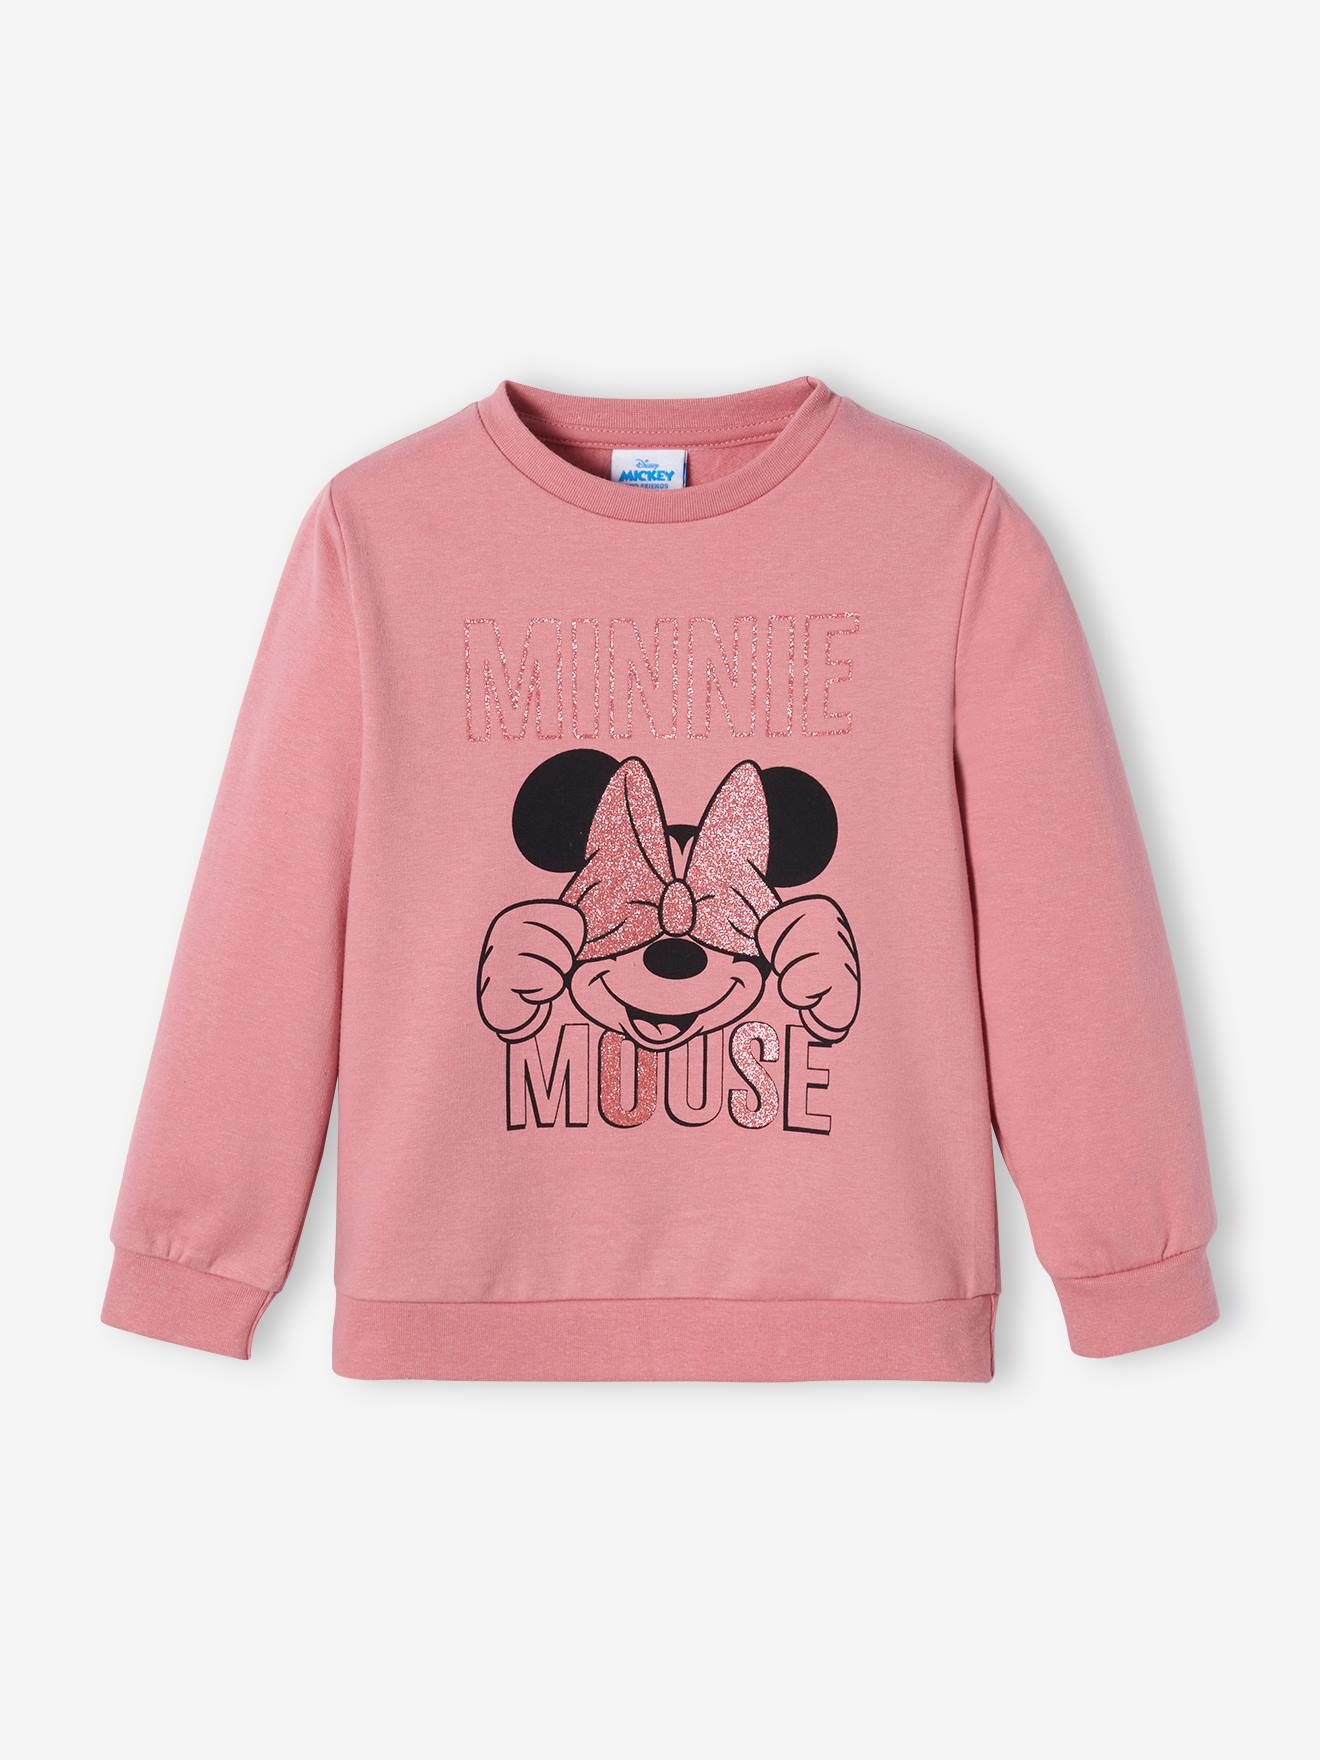 Disney Minnie Mouse Girls Jumper Size 6,8,9,10 Years 